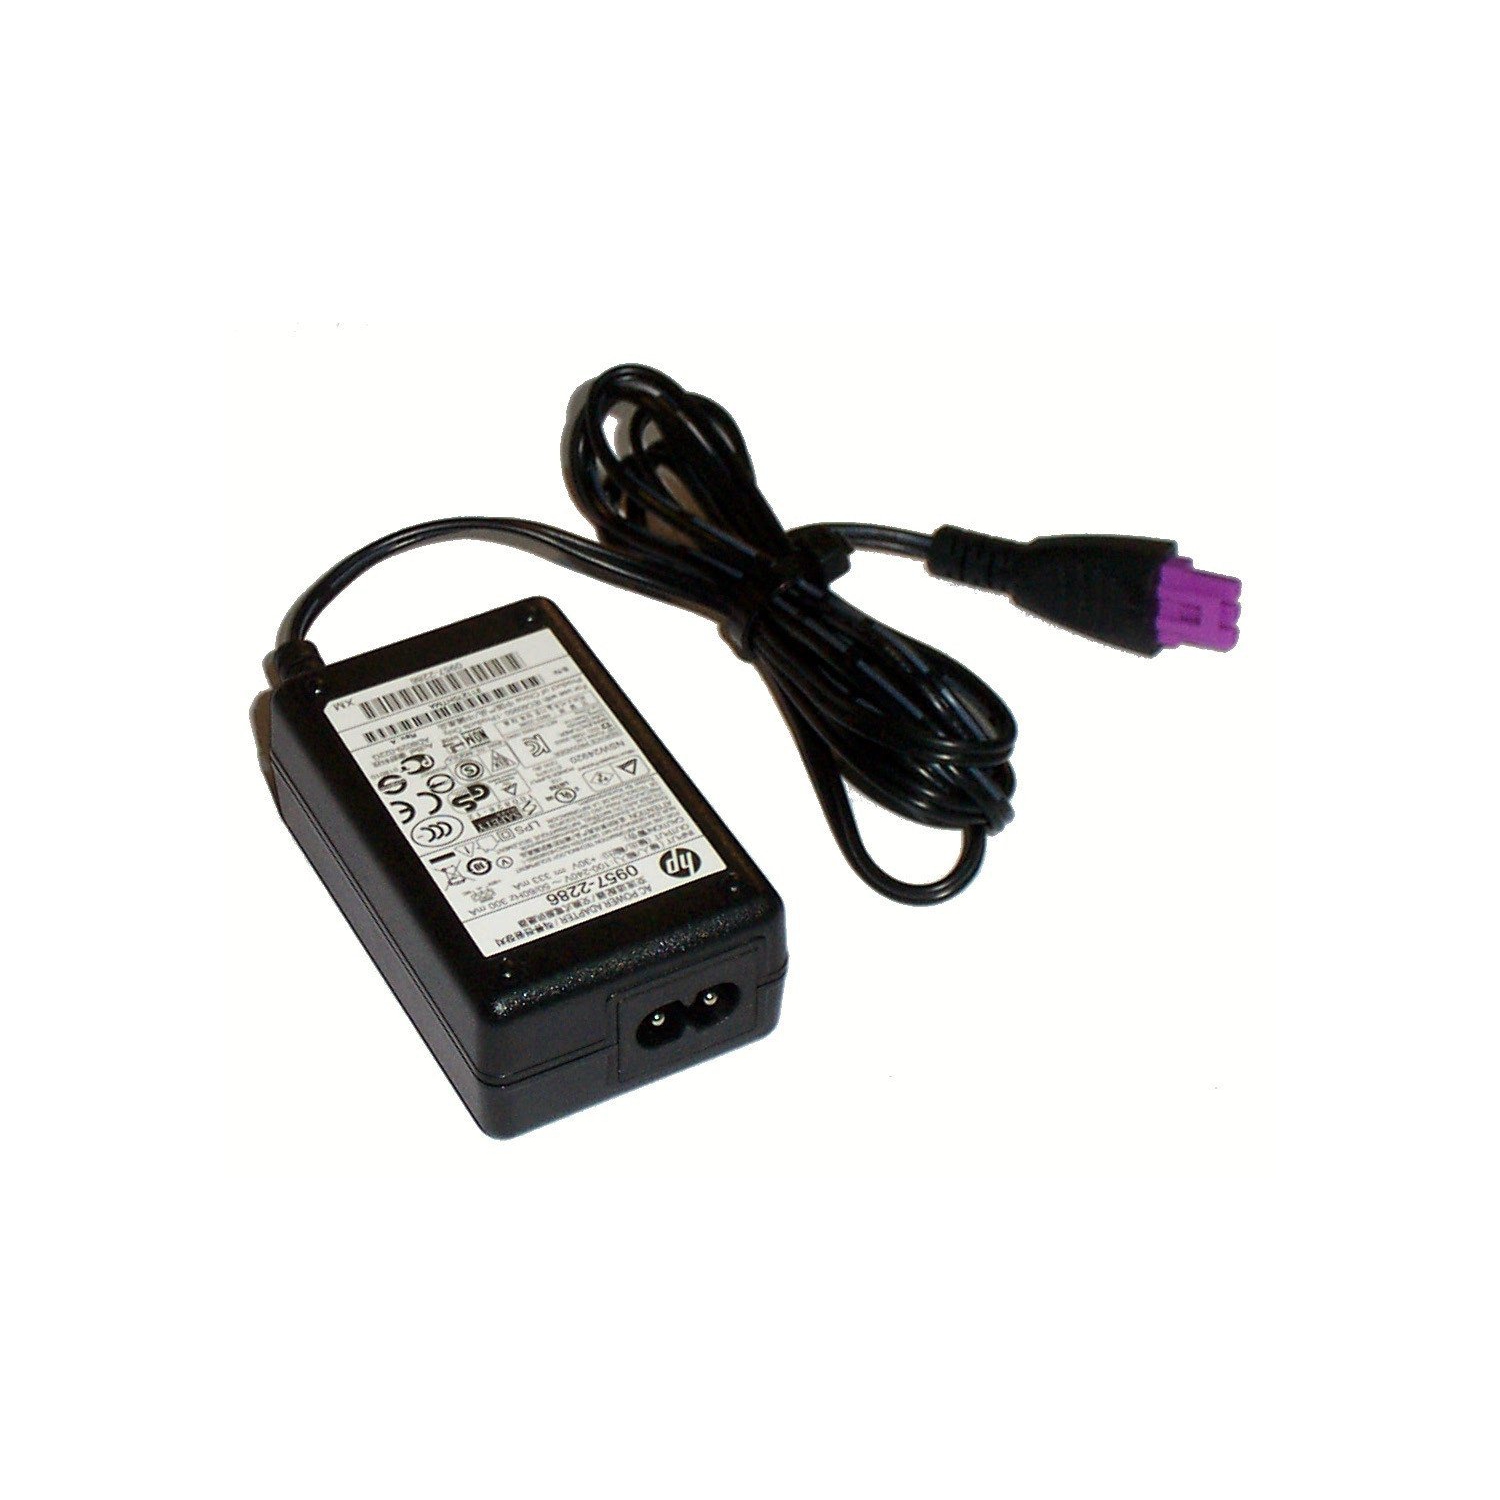 New Genuine HP Deskjet Ink Advantage 3054A 3515 3516 Printer AC Power Supply Adapter Charger 10W